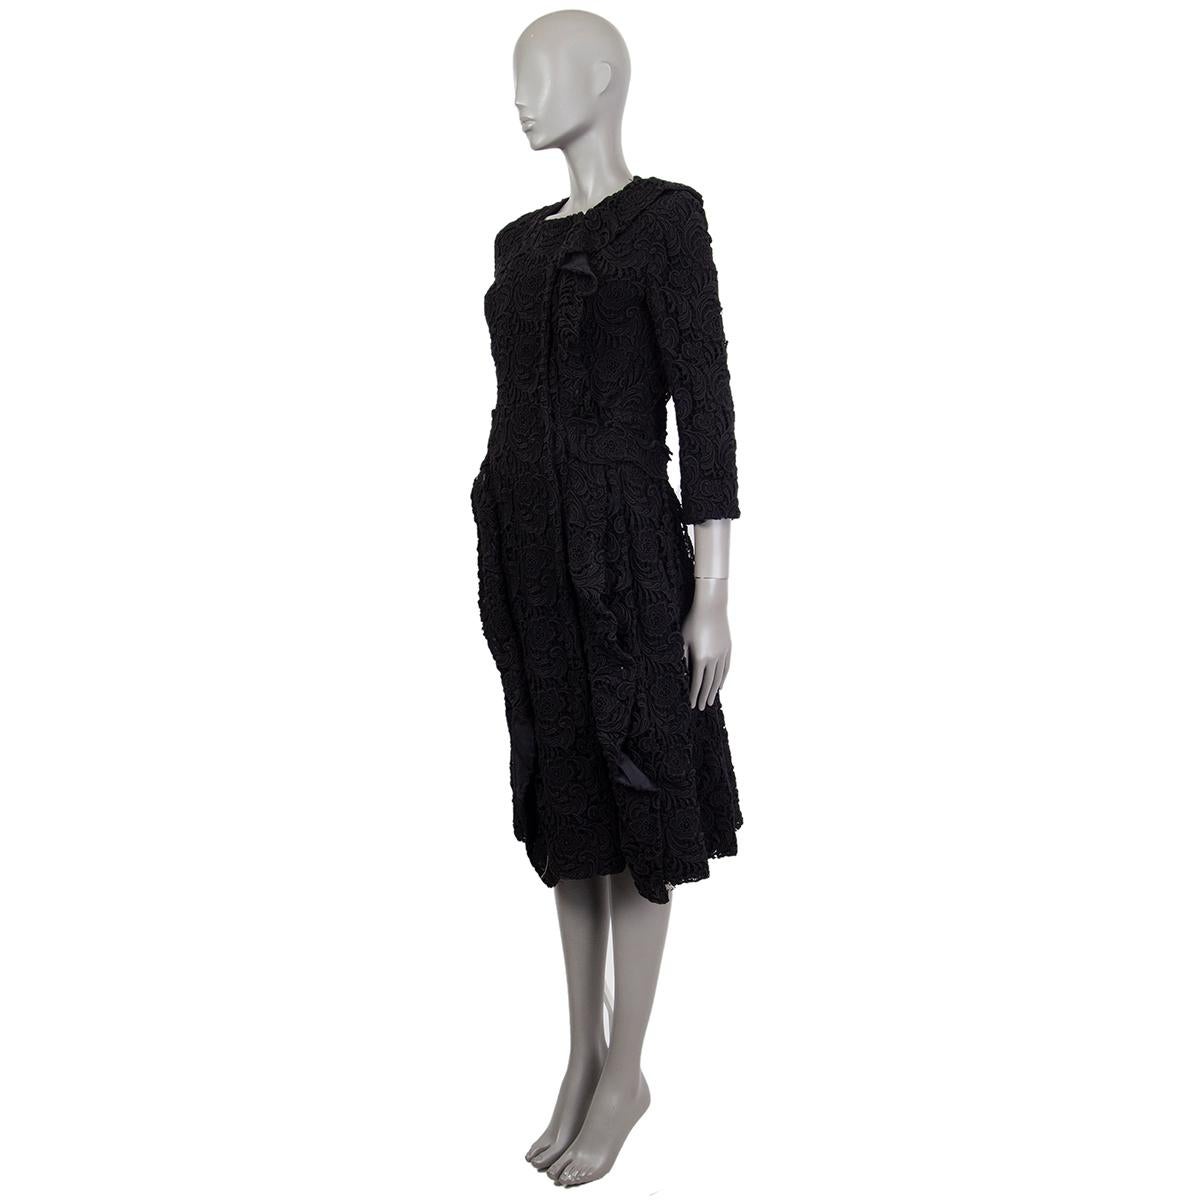 100% authentic Prada front ruffle embroidered-lace coat in black cotton (90%) and polyester (10%) with 3/4 sleeves and waist belt in the back. Closes with concealed snap-buttons on the front. Lined. Has been worn and is in excellent